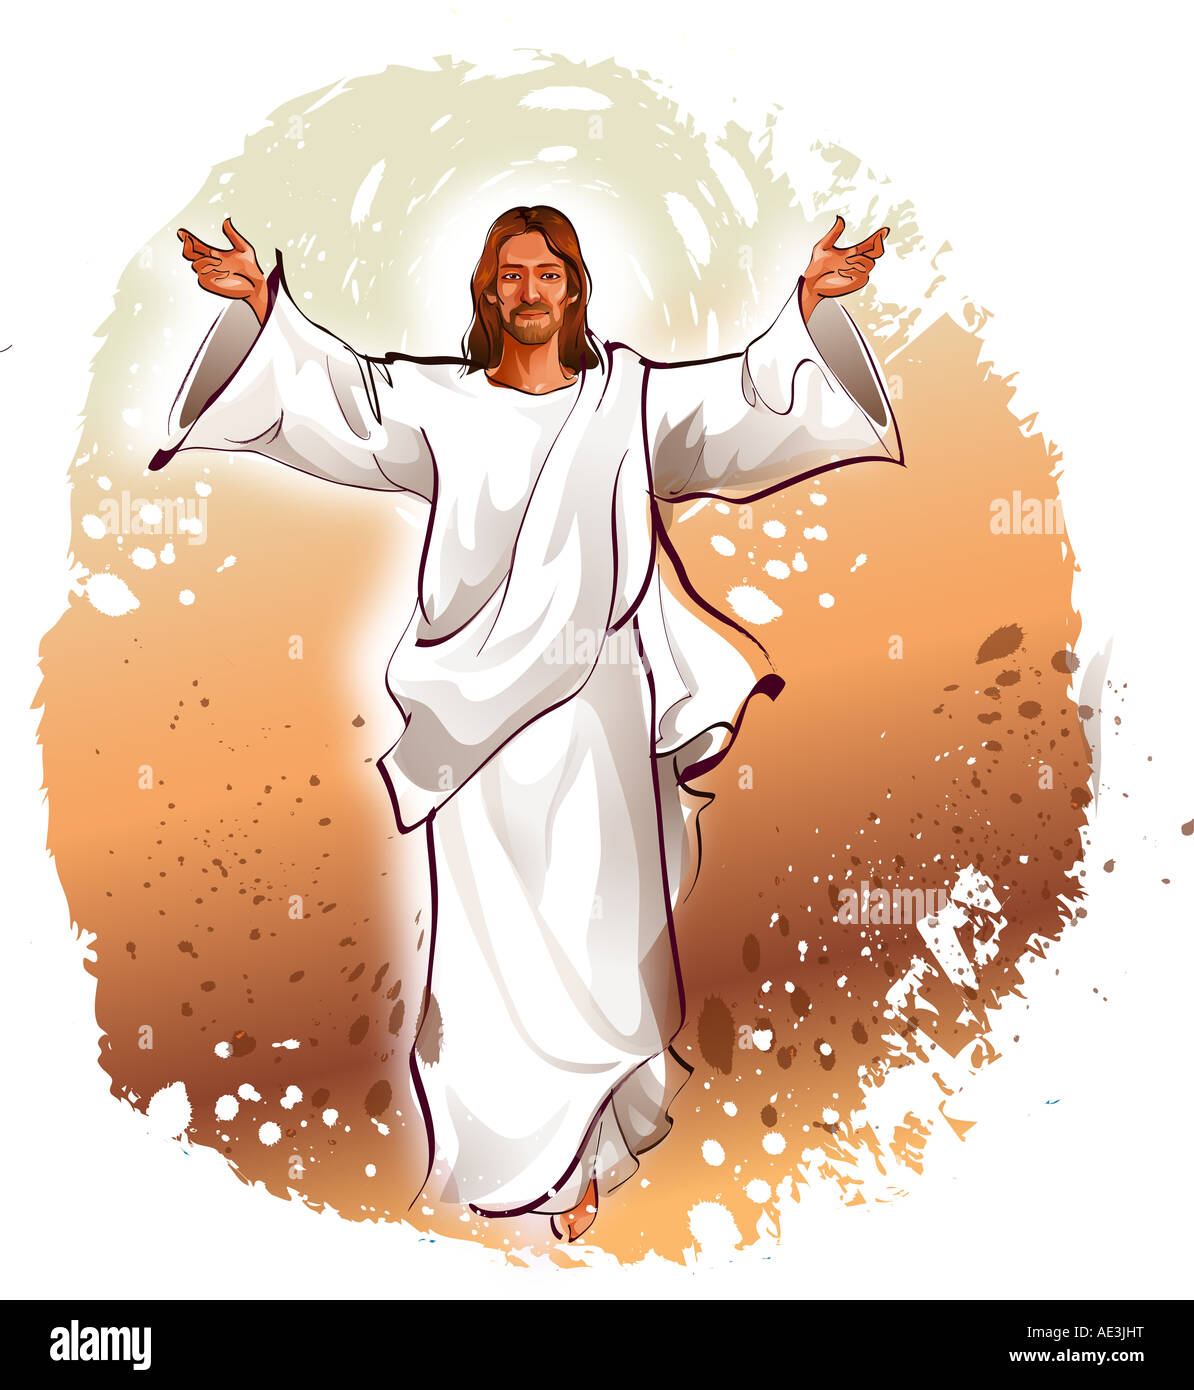 Jesus Christ blessing with his arms outstretched Stock Photo